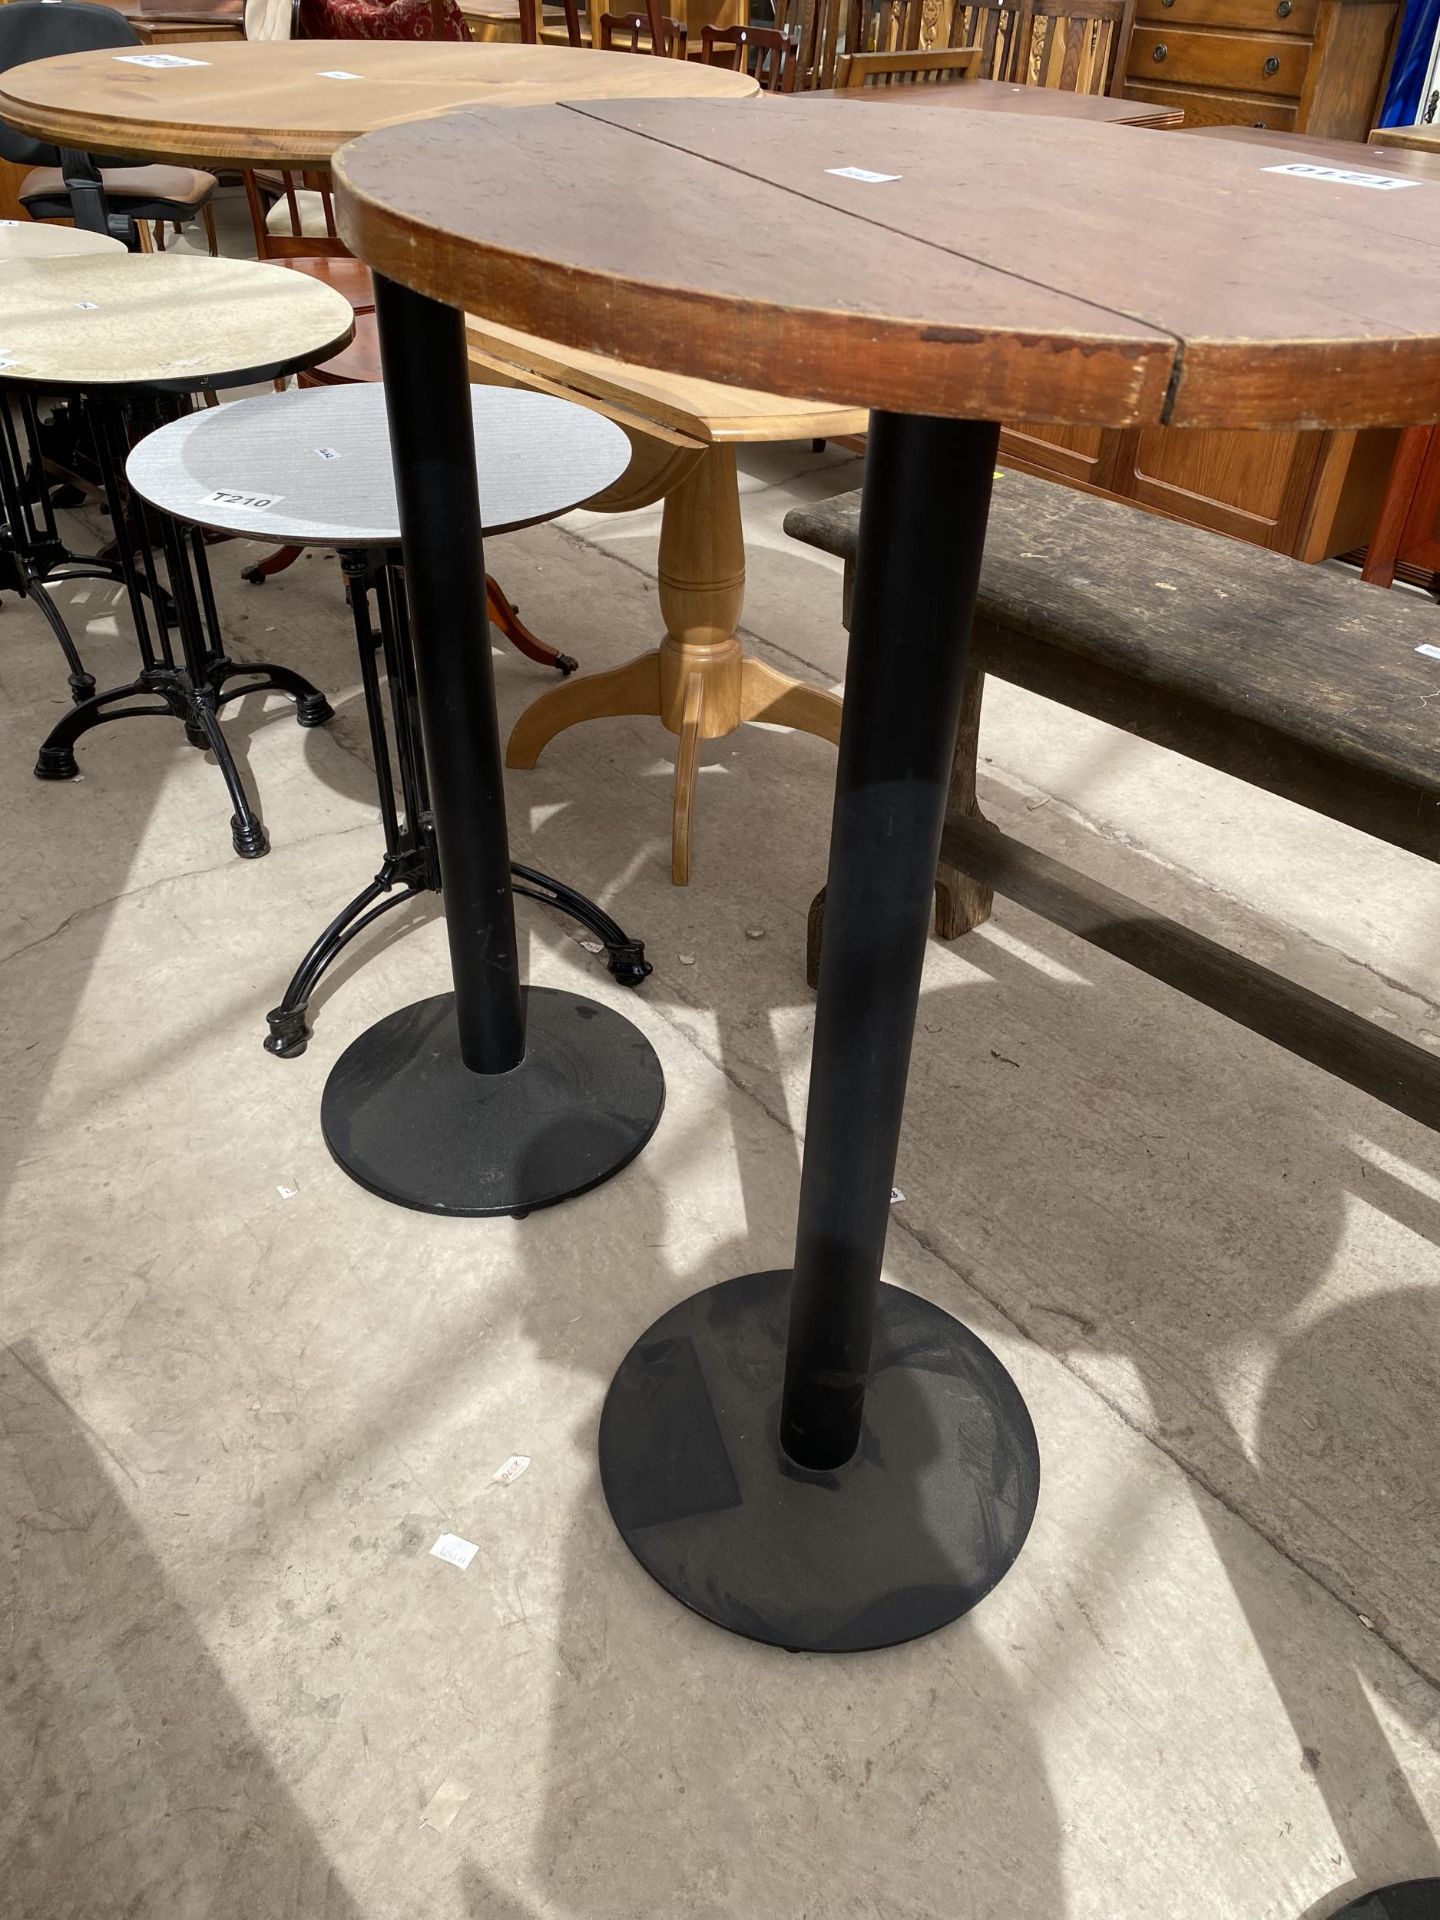 TWO TALL PUB TABLES, 24 AND 26" DIAMETER, ON BLACK METALWARE BASES - Image 2 of 2